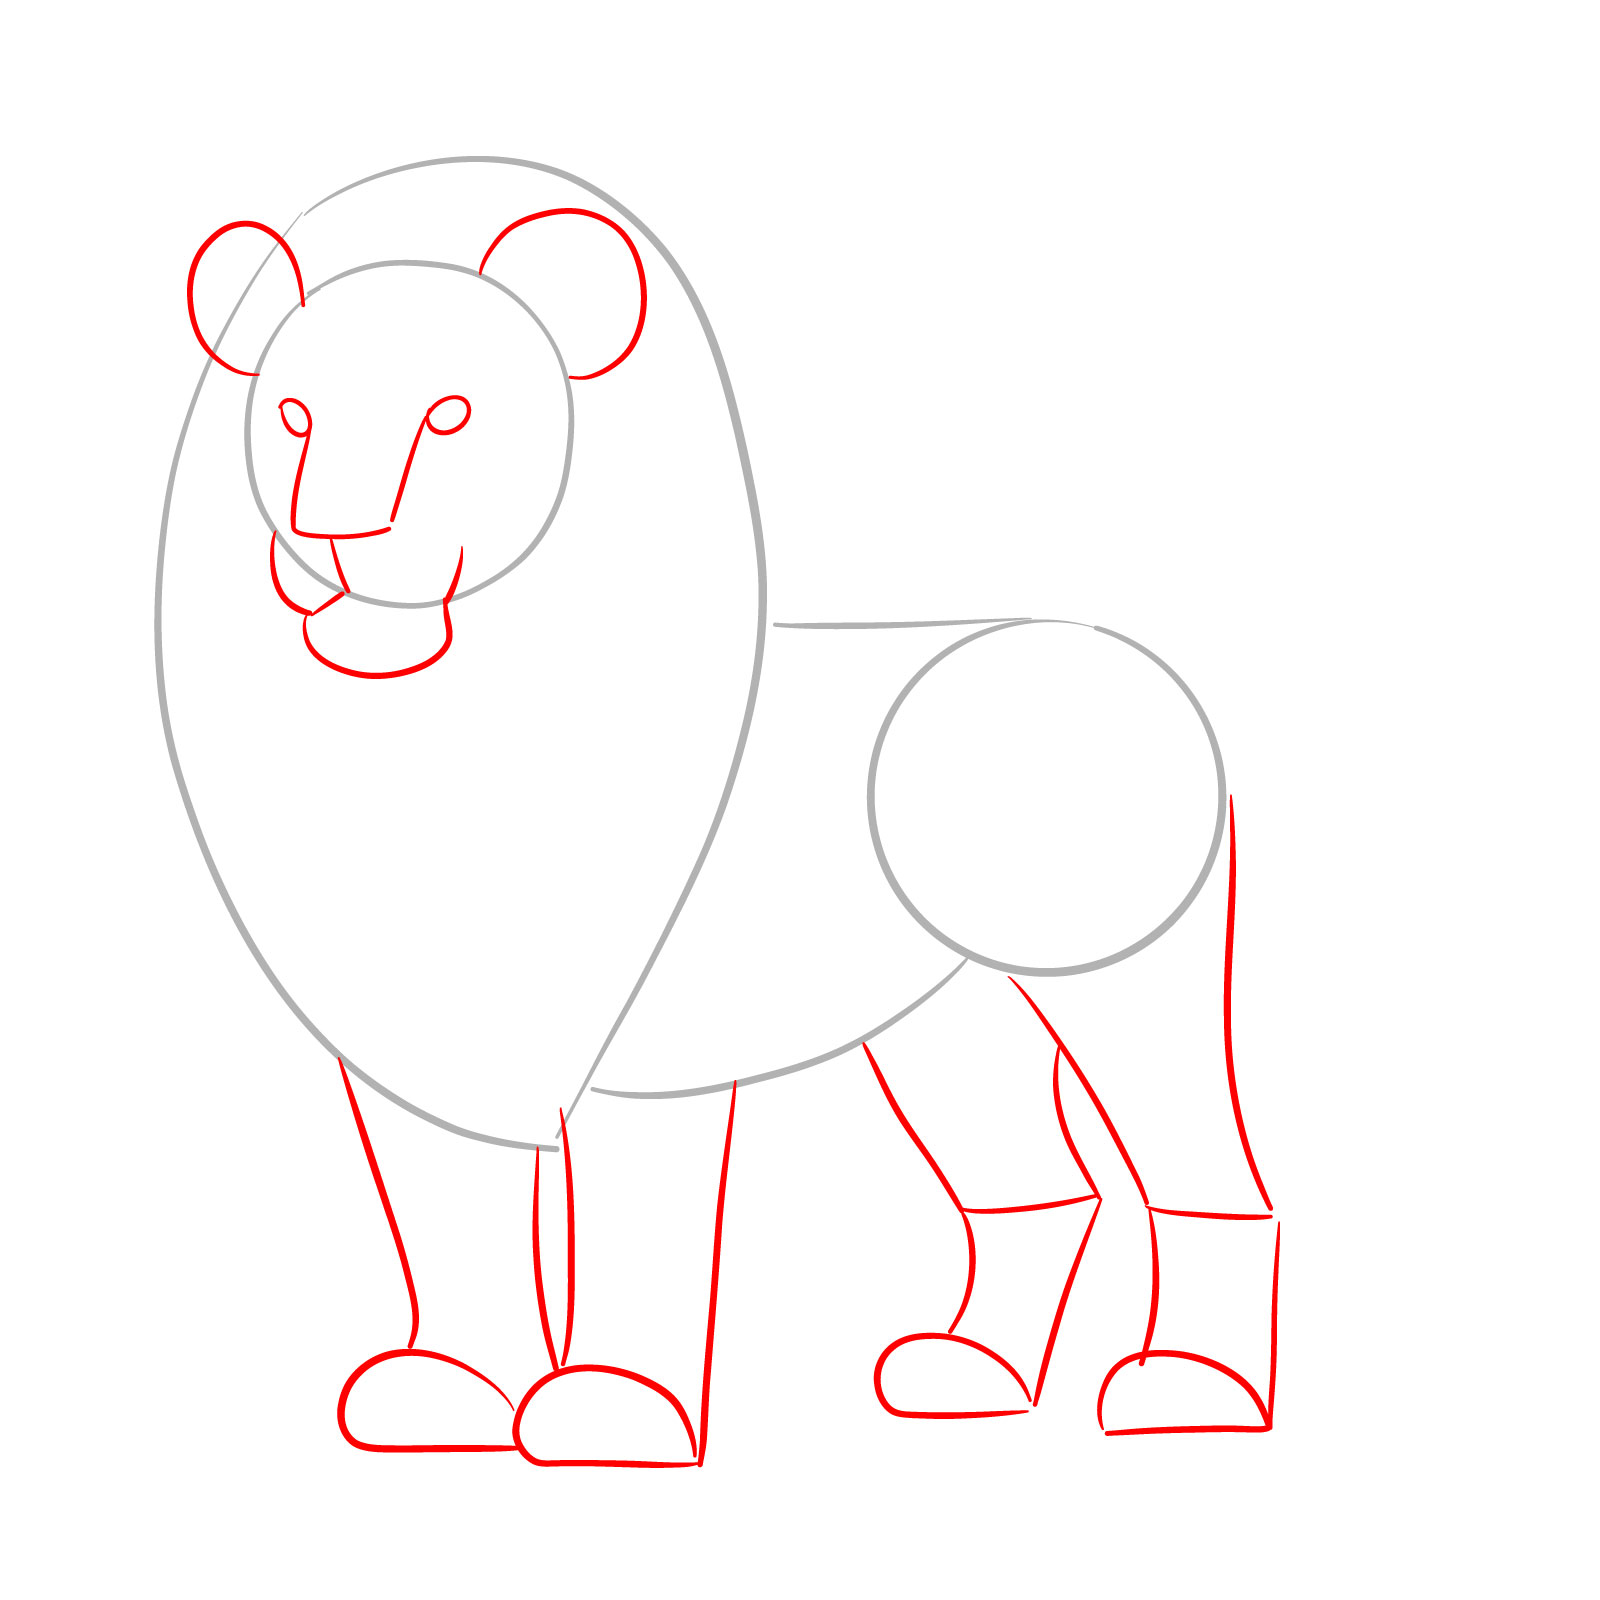 How to draw a simple lion with shapes for nose, eyes, ears, and legs - step 02